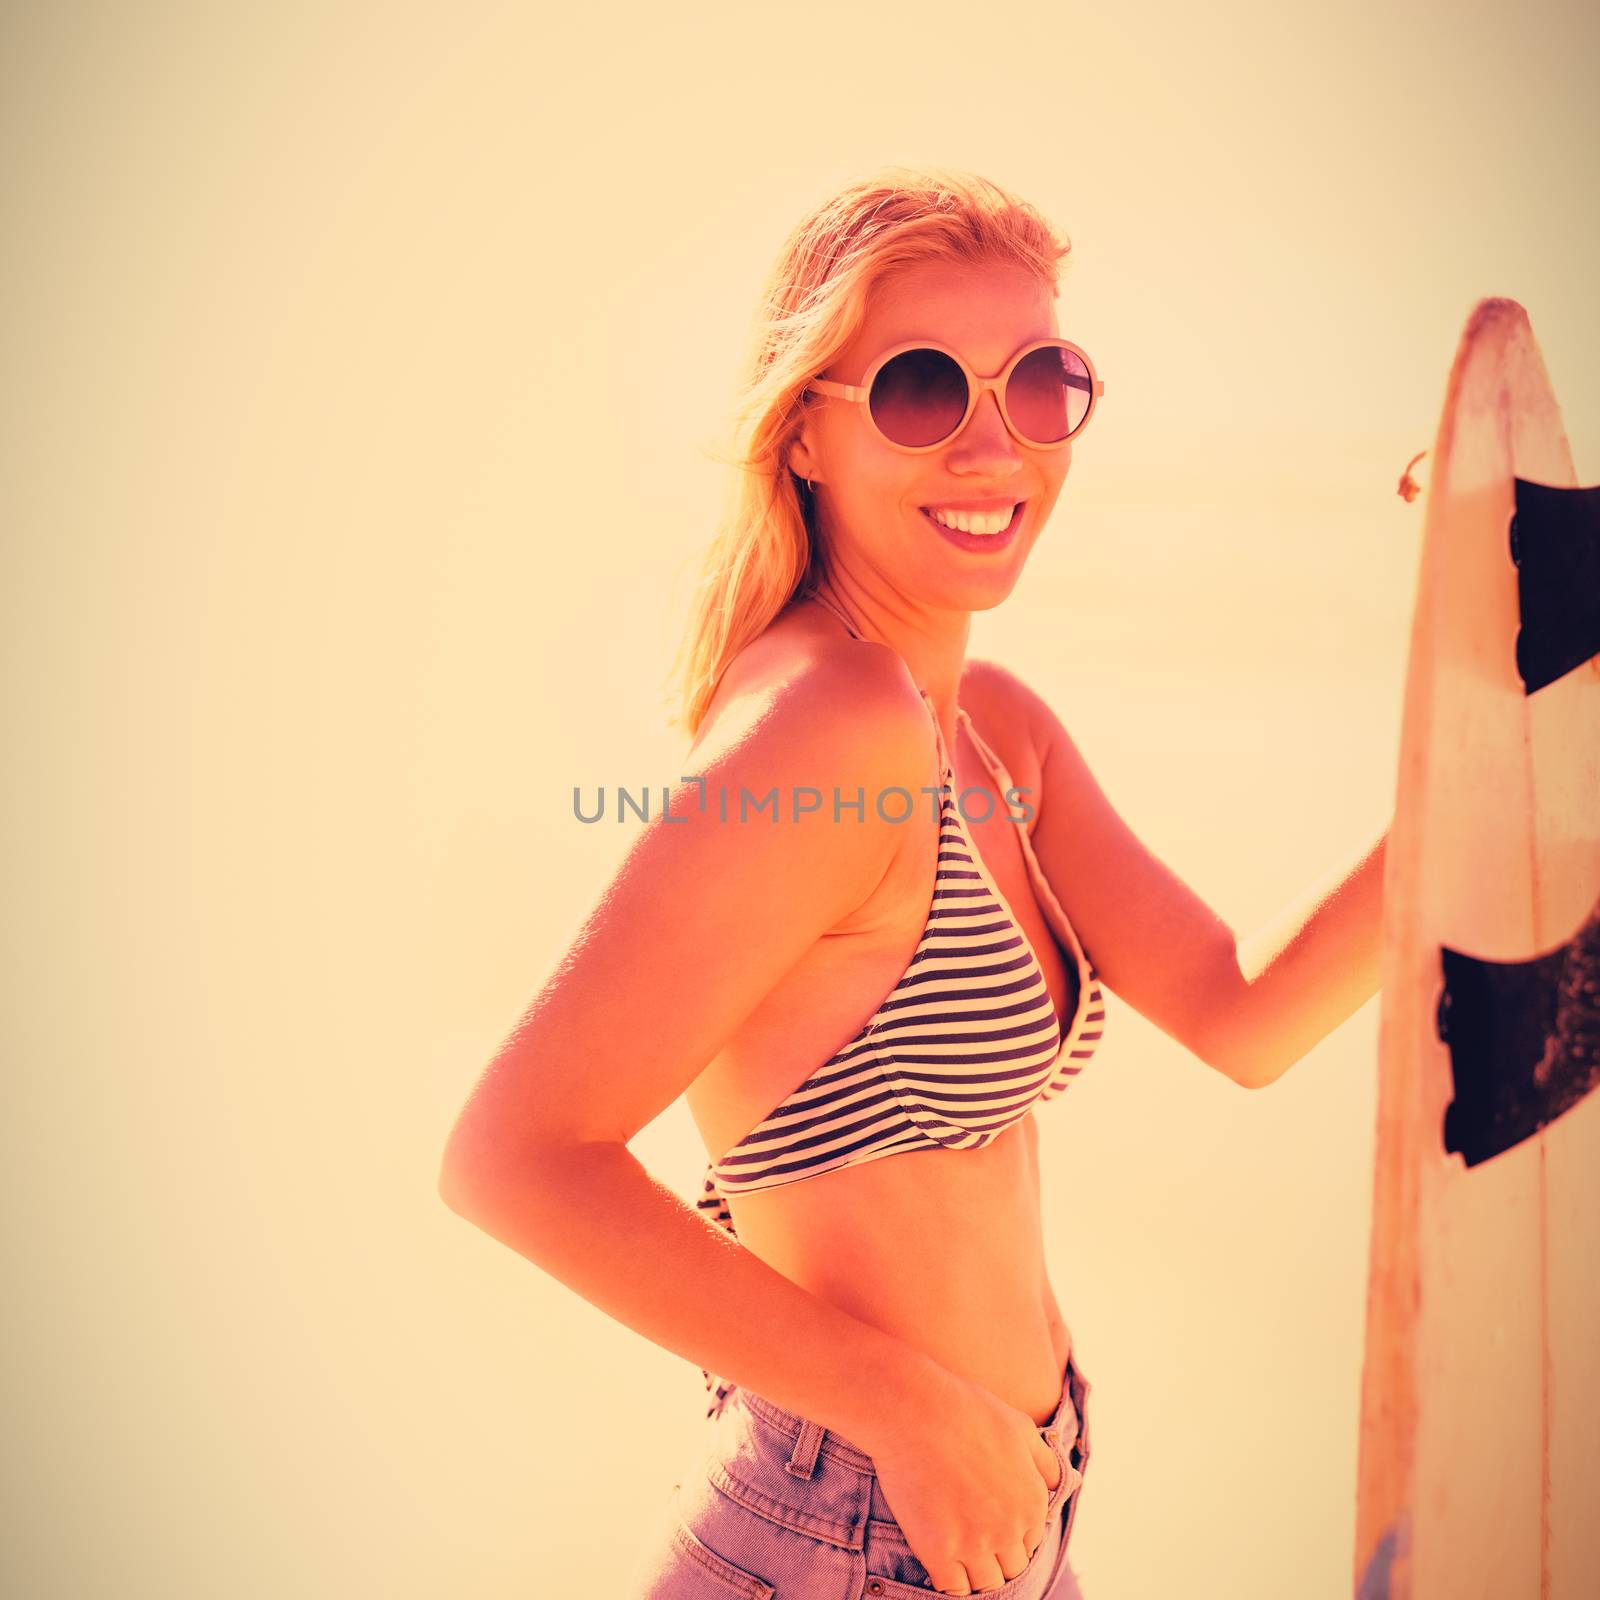 Portrait of smiling young woman holding surfboard at beach during sunny day